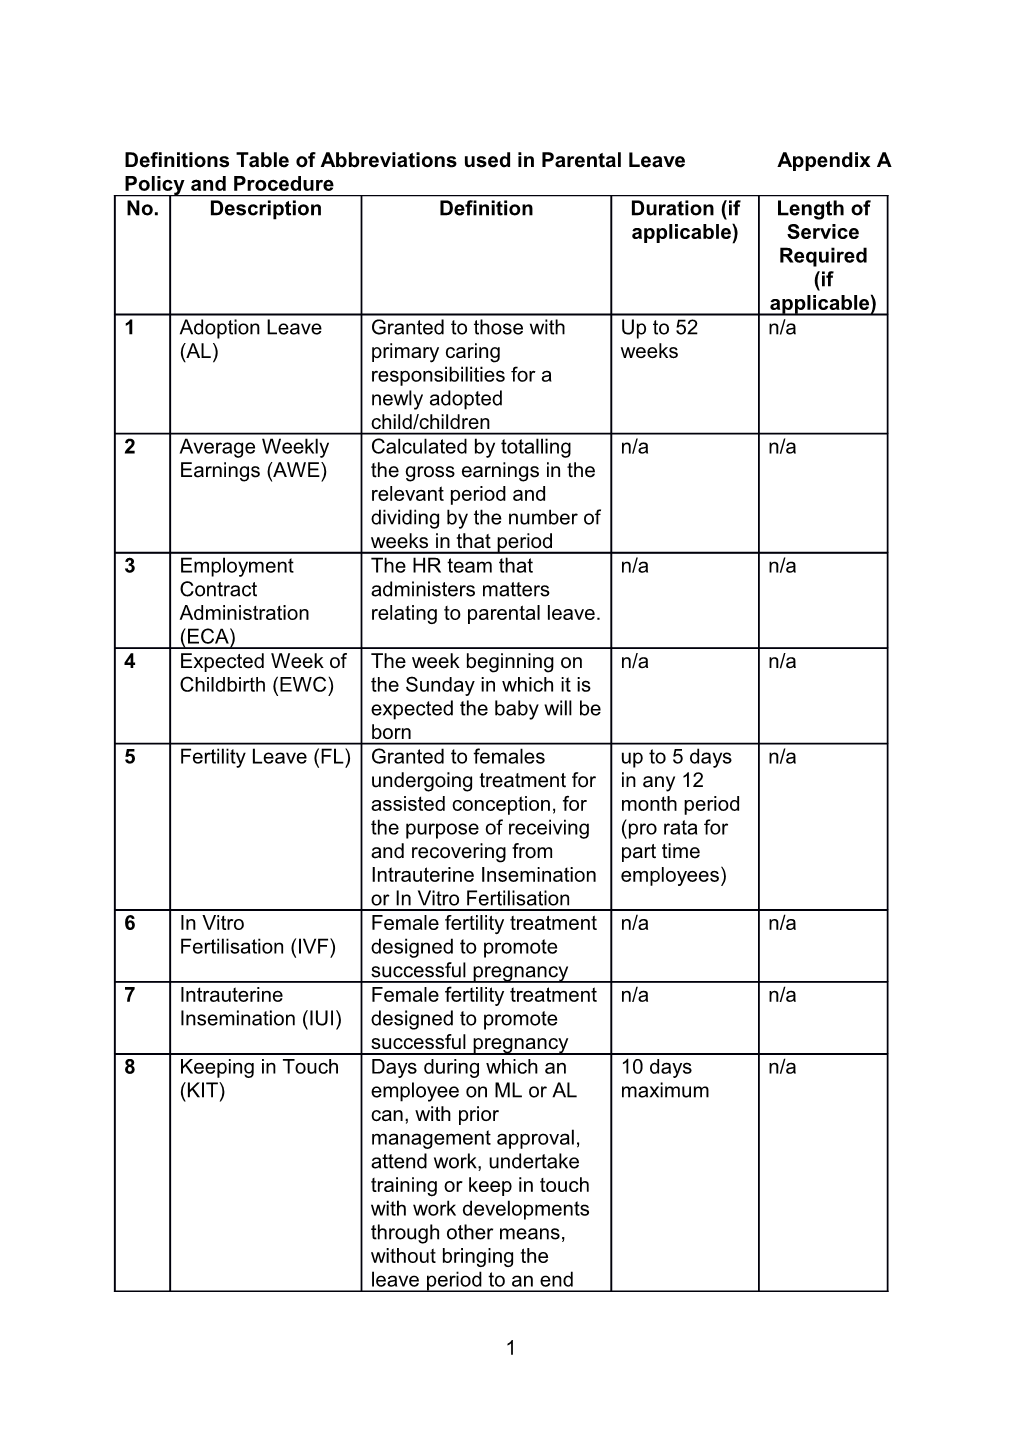 Definitions Table of Abbreviations Used in Parental Leave Appendix a Policy and Procedure